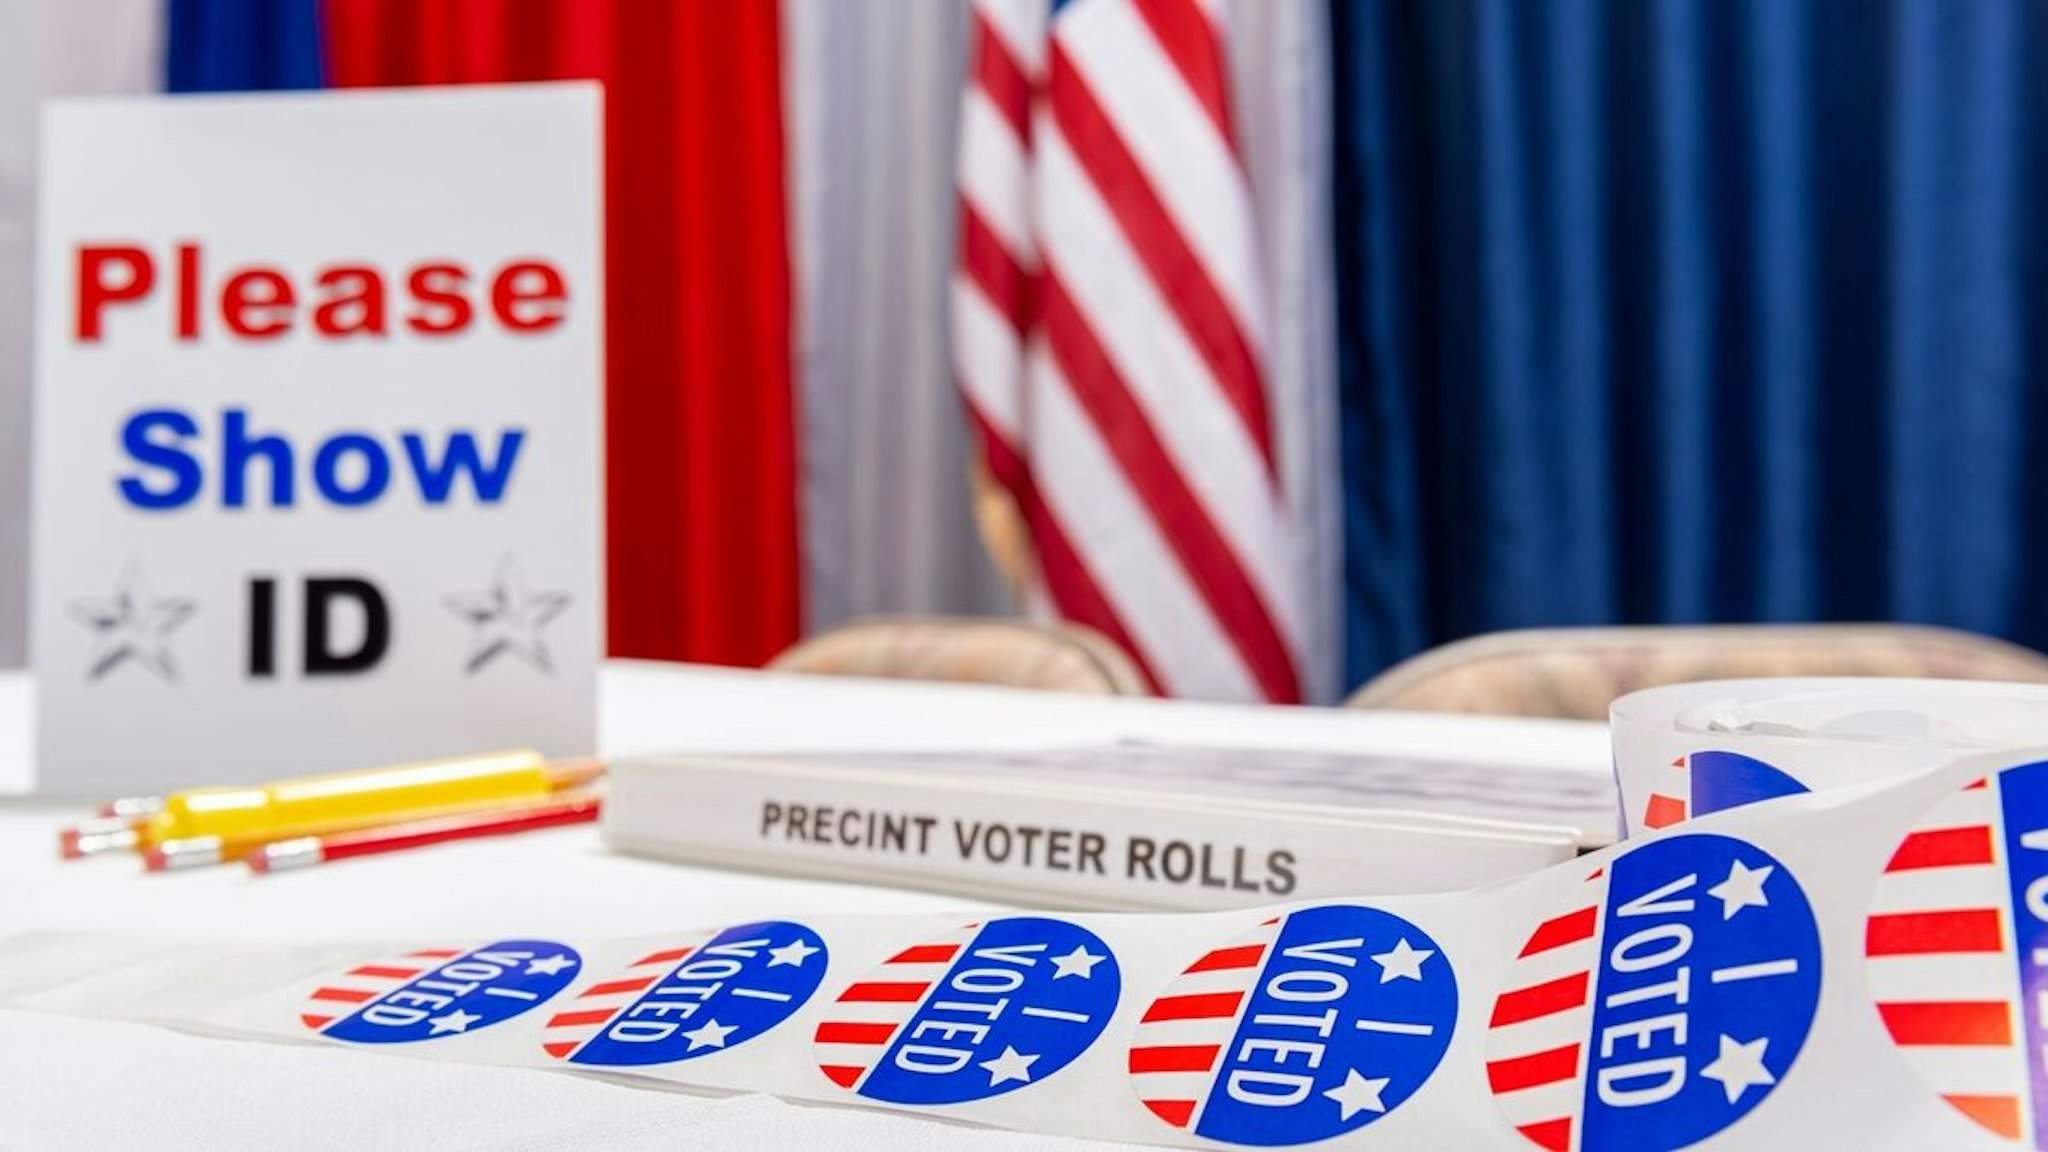 A roll of “I VOTED” stickers sitting on the table of an empty registration desk at a US polling station on election day with a “PLEASE SHOW ID” sign, red, white and blue bunting an American flag in the background.